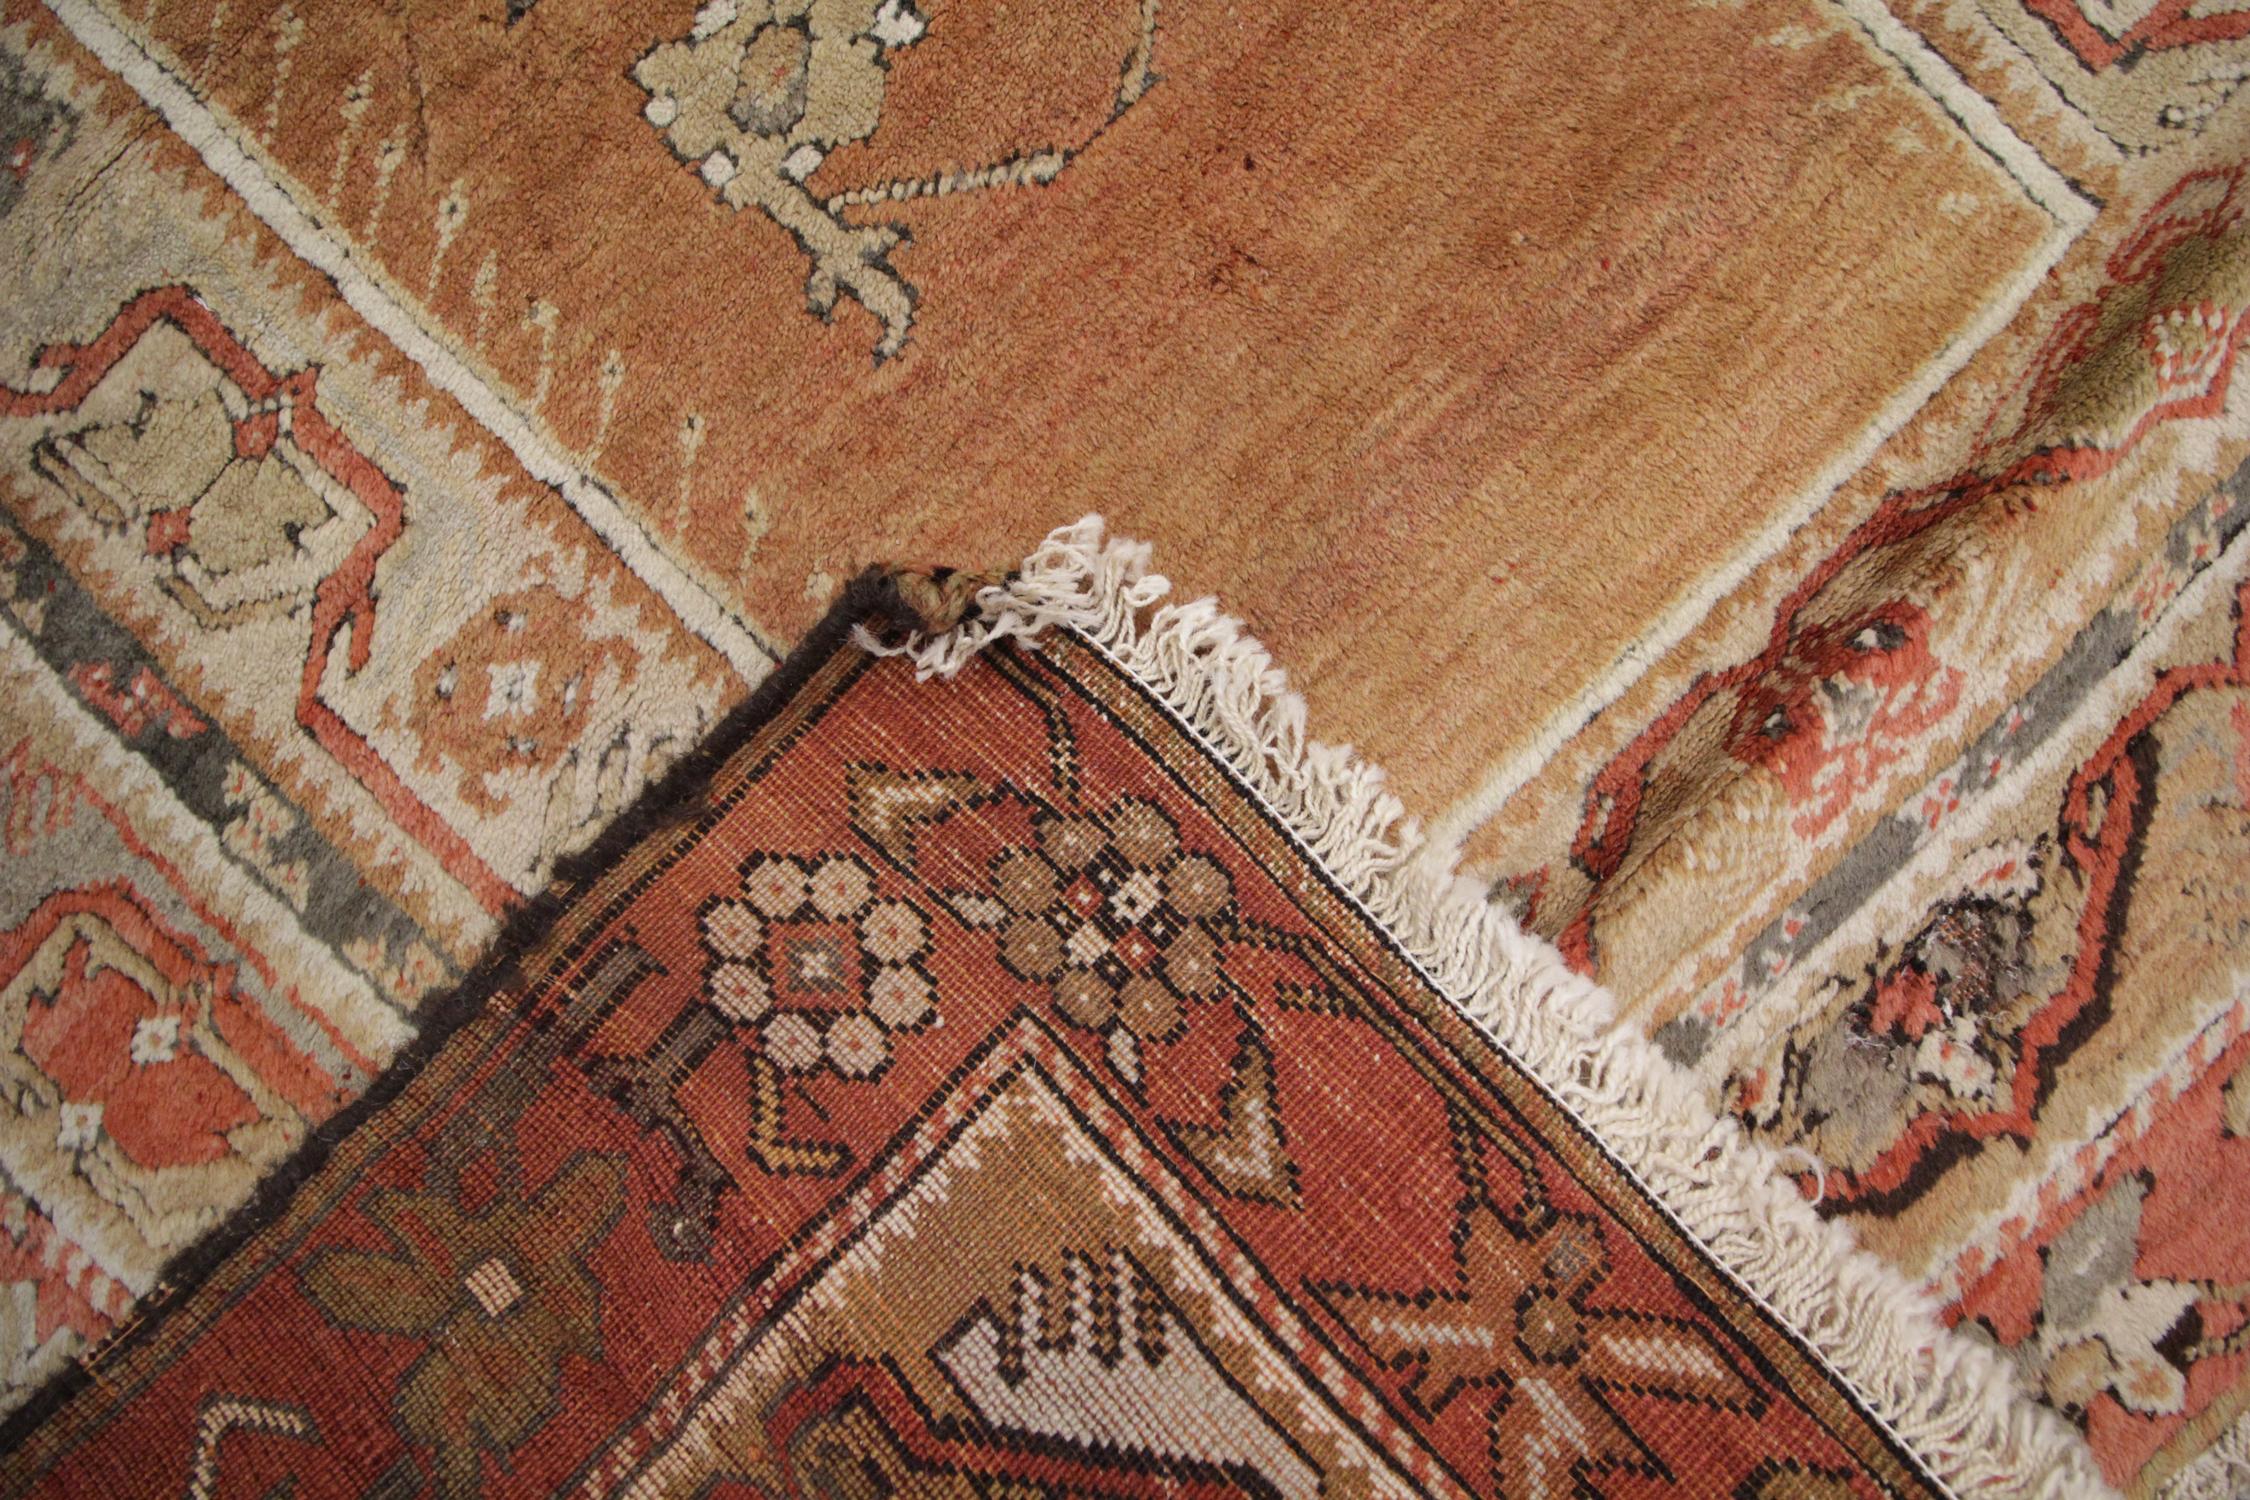 Antique Rug Turkish Traditional Handmade Carpet Brown Living Room Rug for Sale In Excellent Condition For Sale In Hampshire, GB